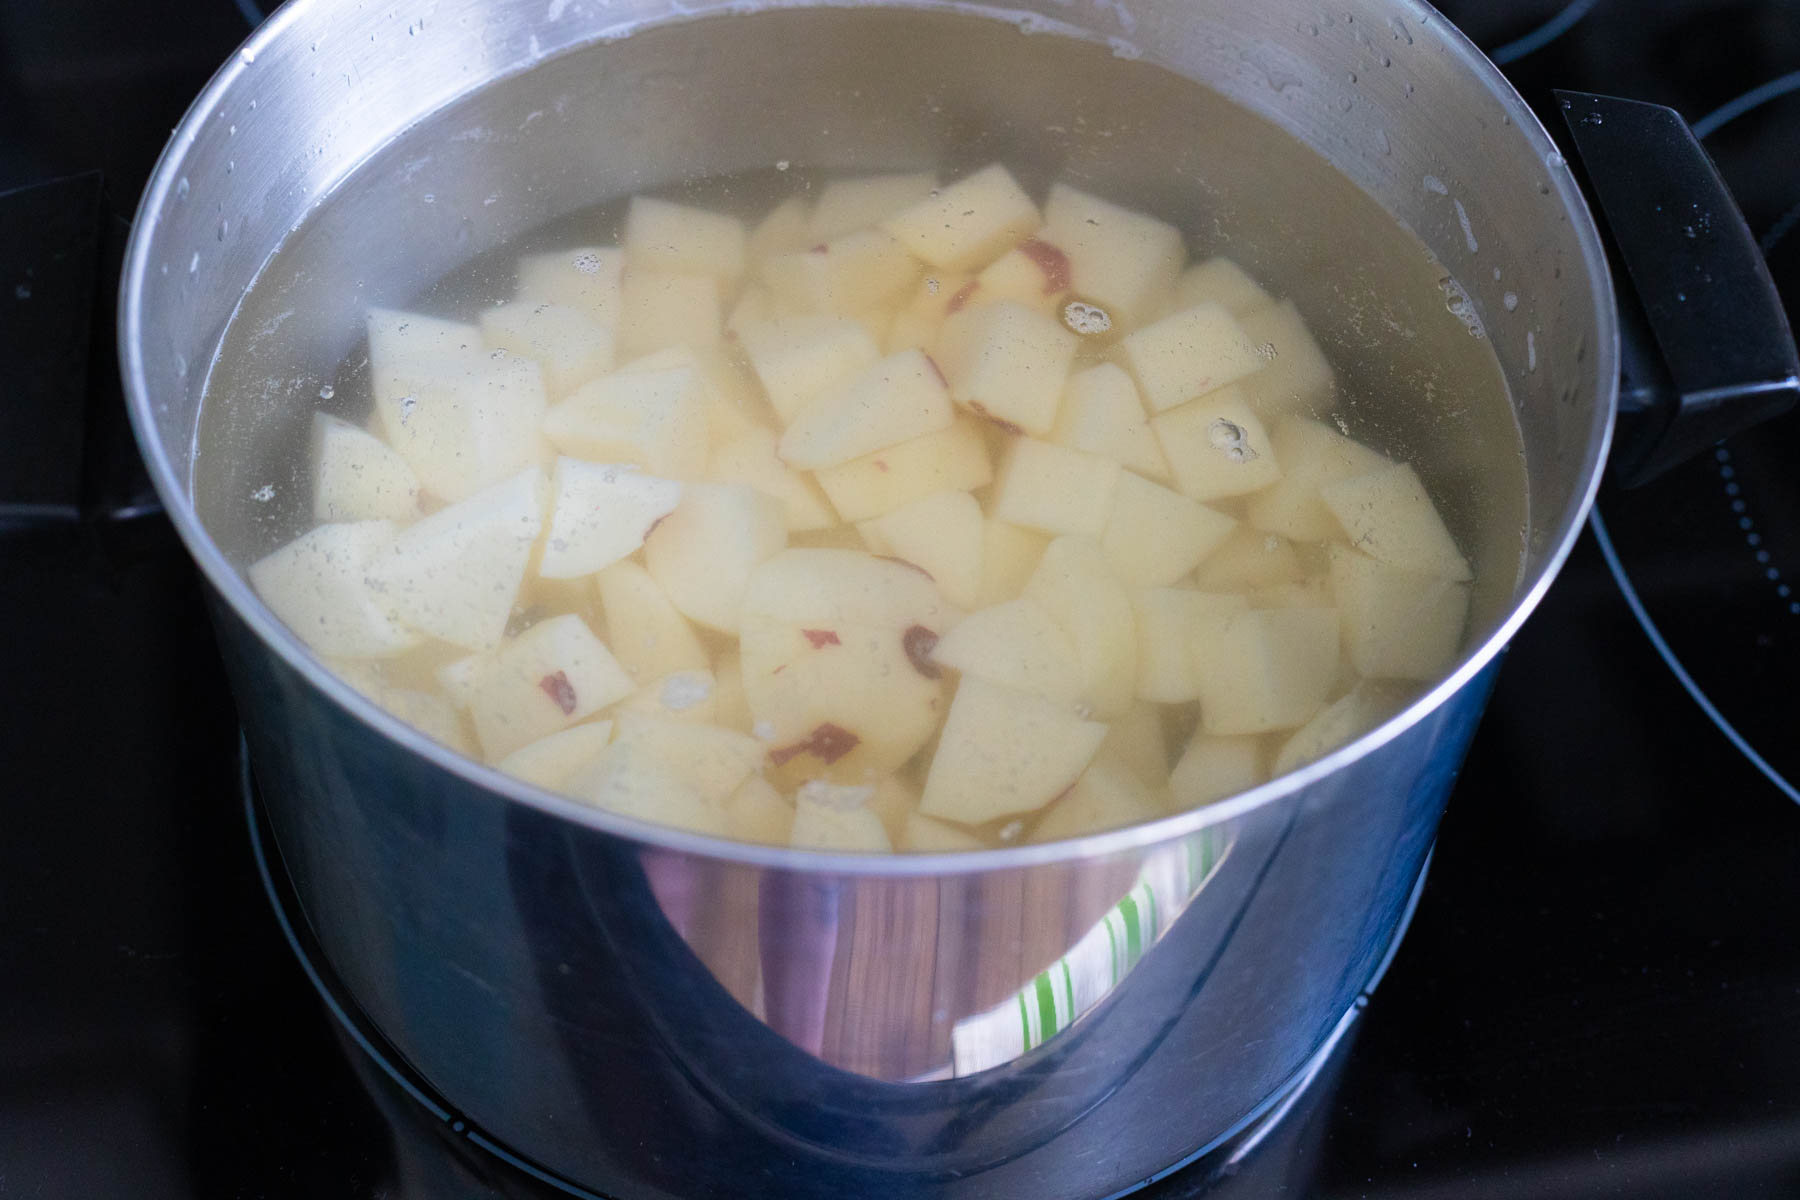 The chopped potatoes are resting in a pot of cold water.